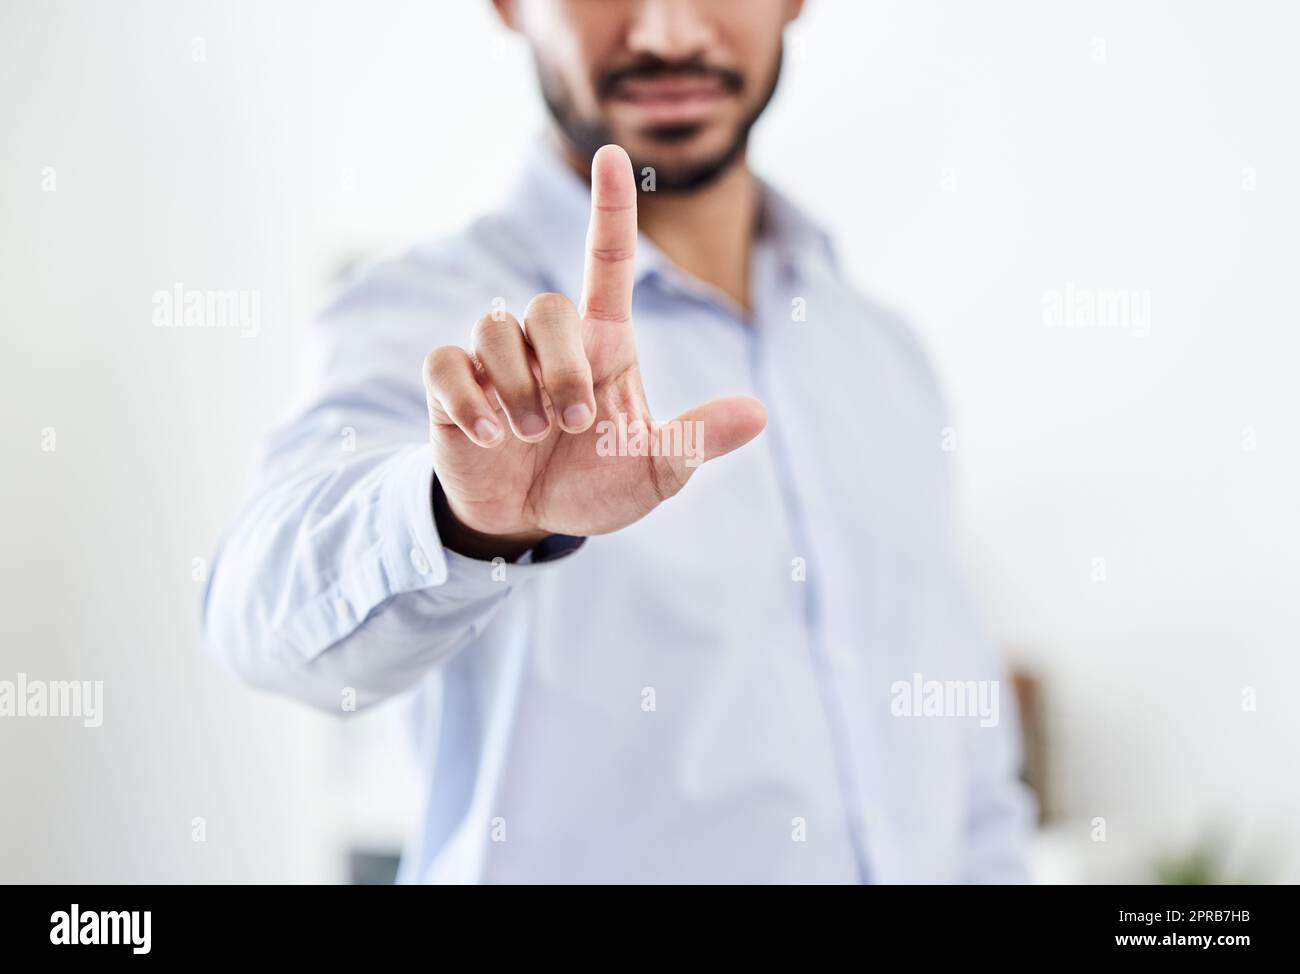 Modern, future and futuristic business man pointing his finger up pressing an empty virtual touchscreen. Closeup portrait of a corporate professional male touching an invisible screen or in an office Stock Photo